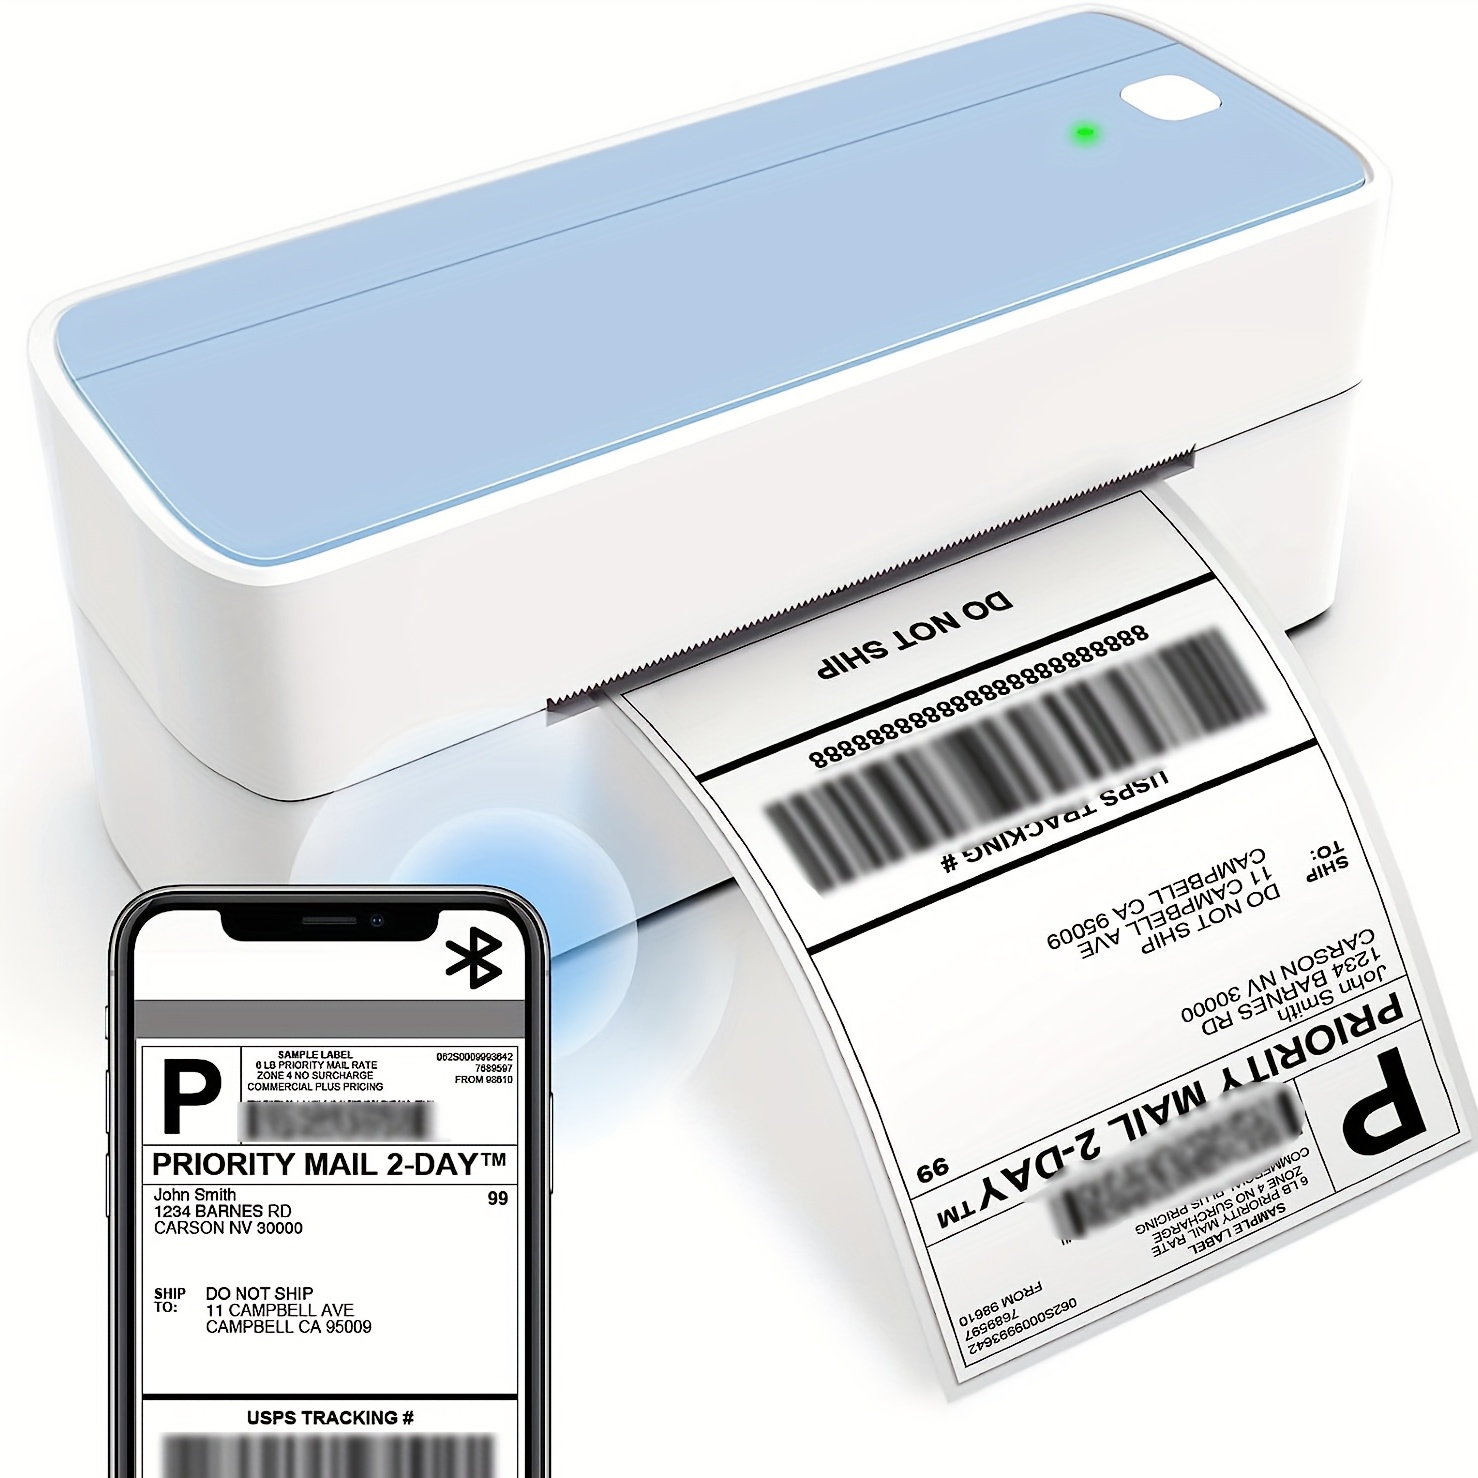 Marklife D100 Thermal Label Printer With Shipping Thermal - Temu